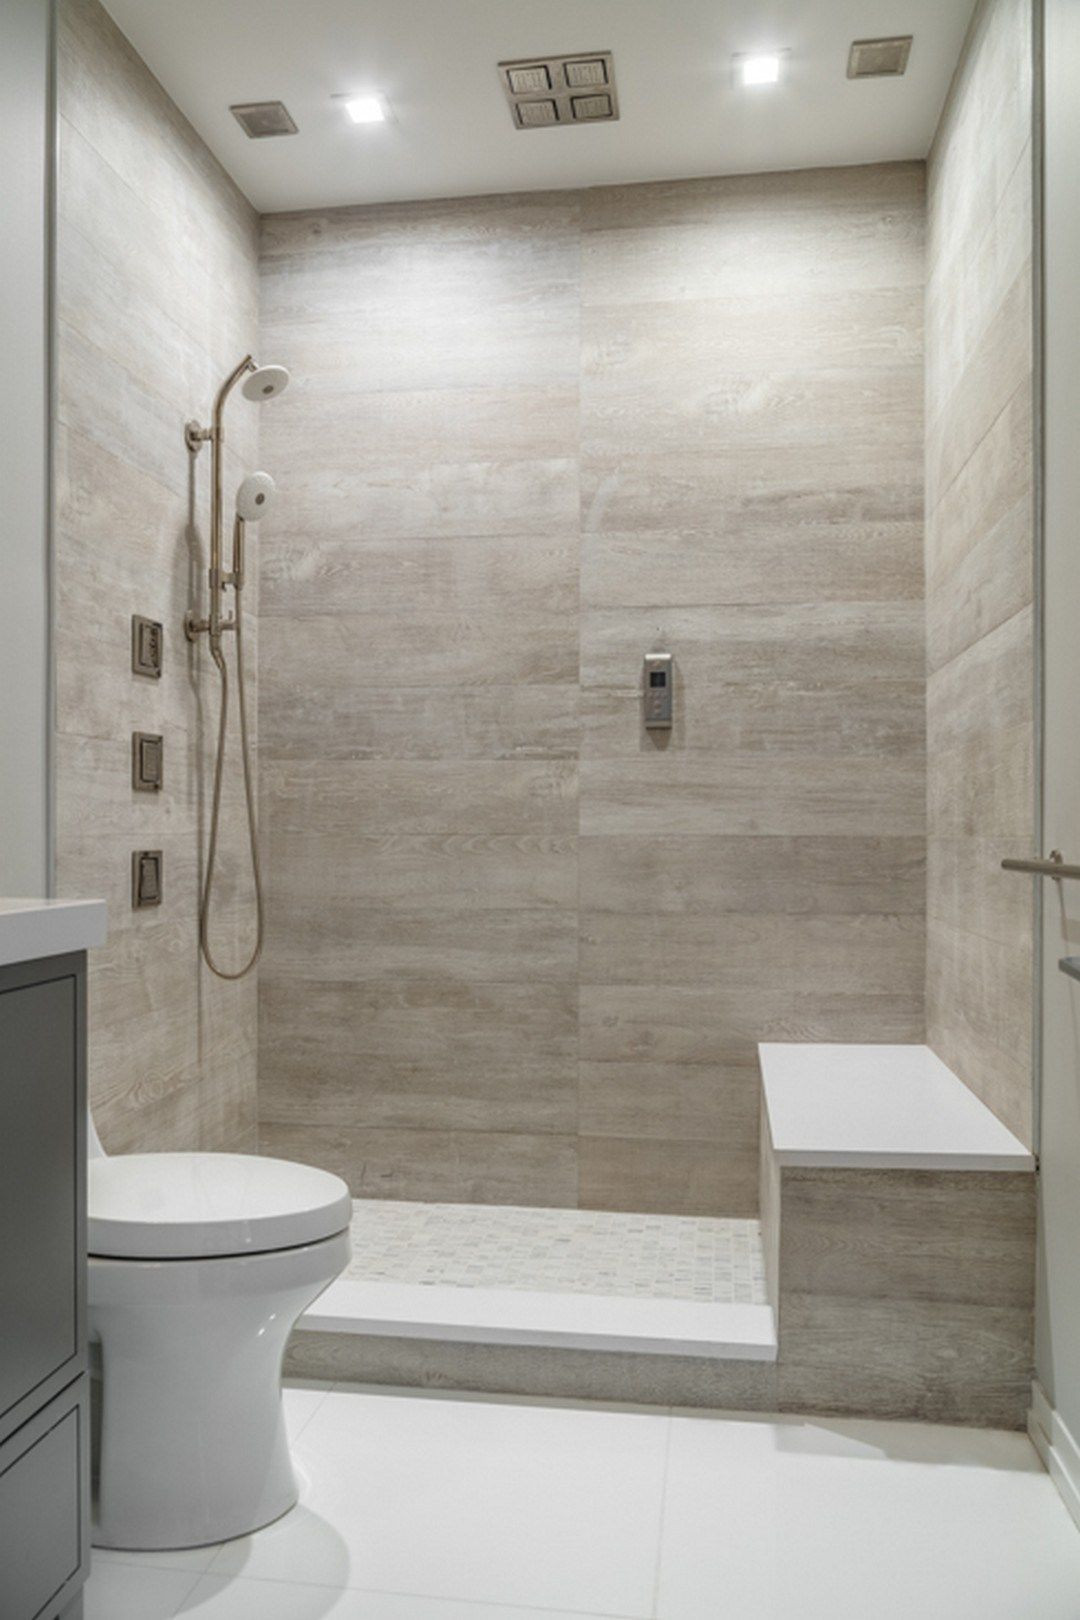 Small Bathroom Tile Design
 Find and save ideas about Bathroom tile designs